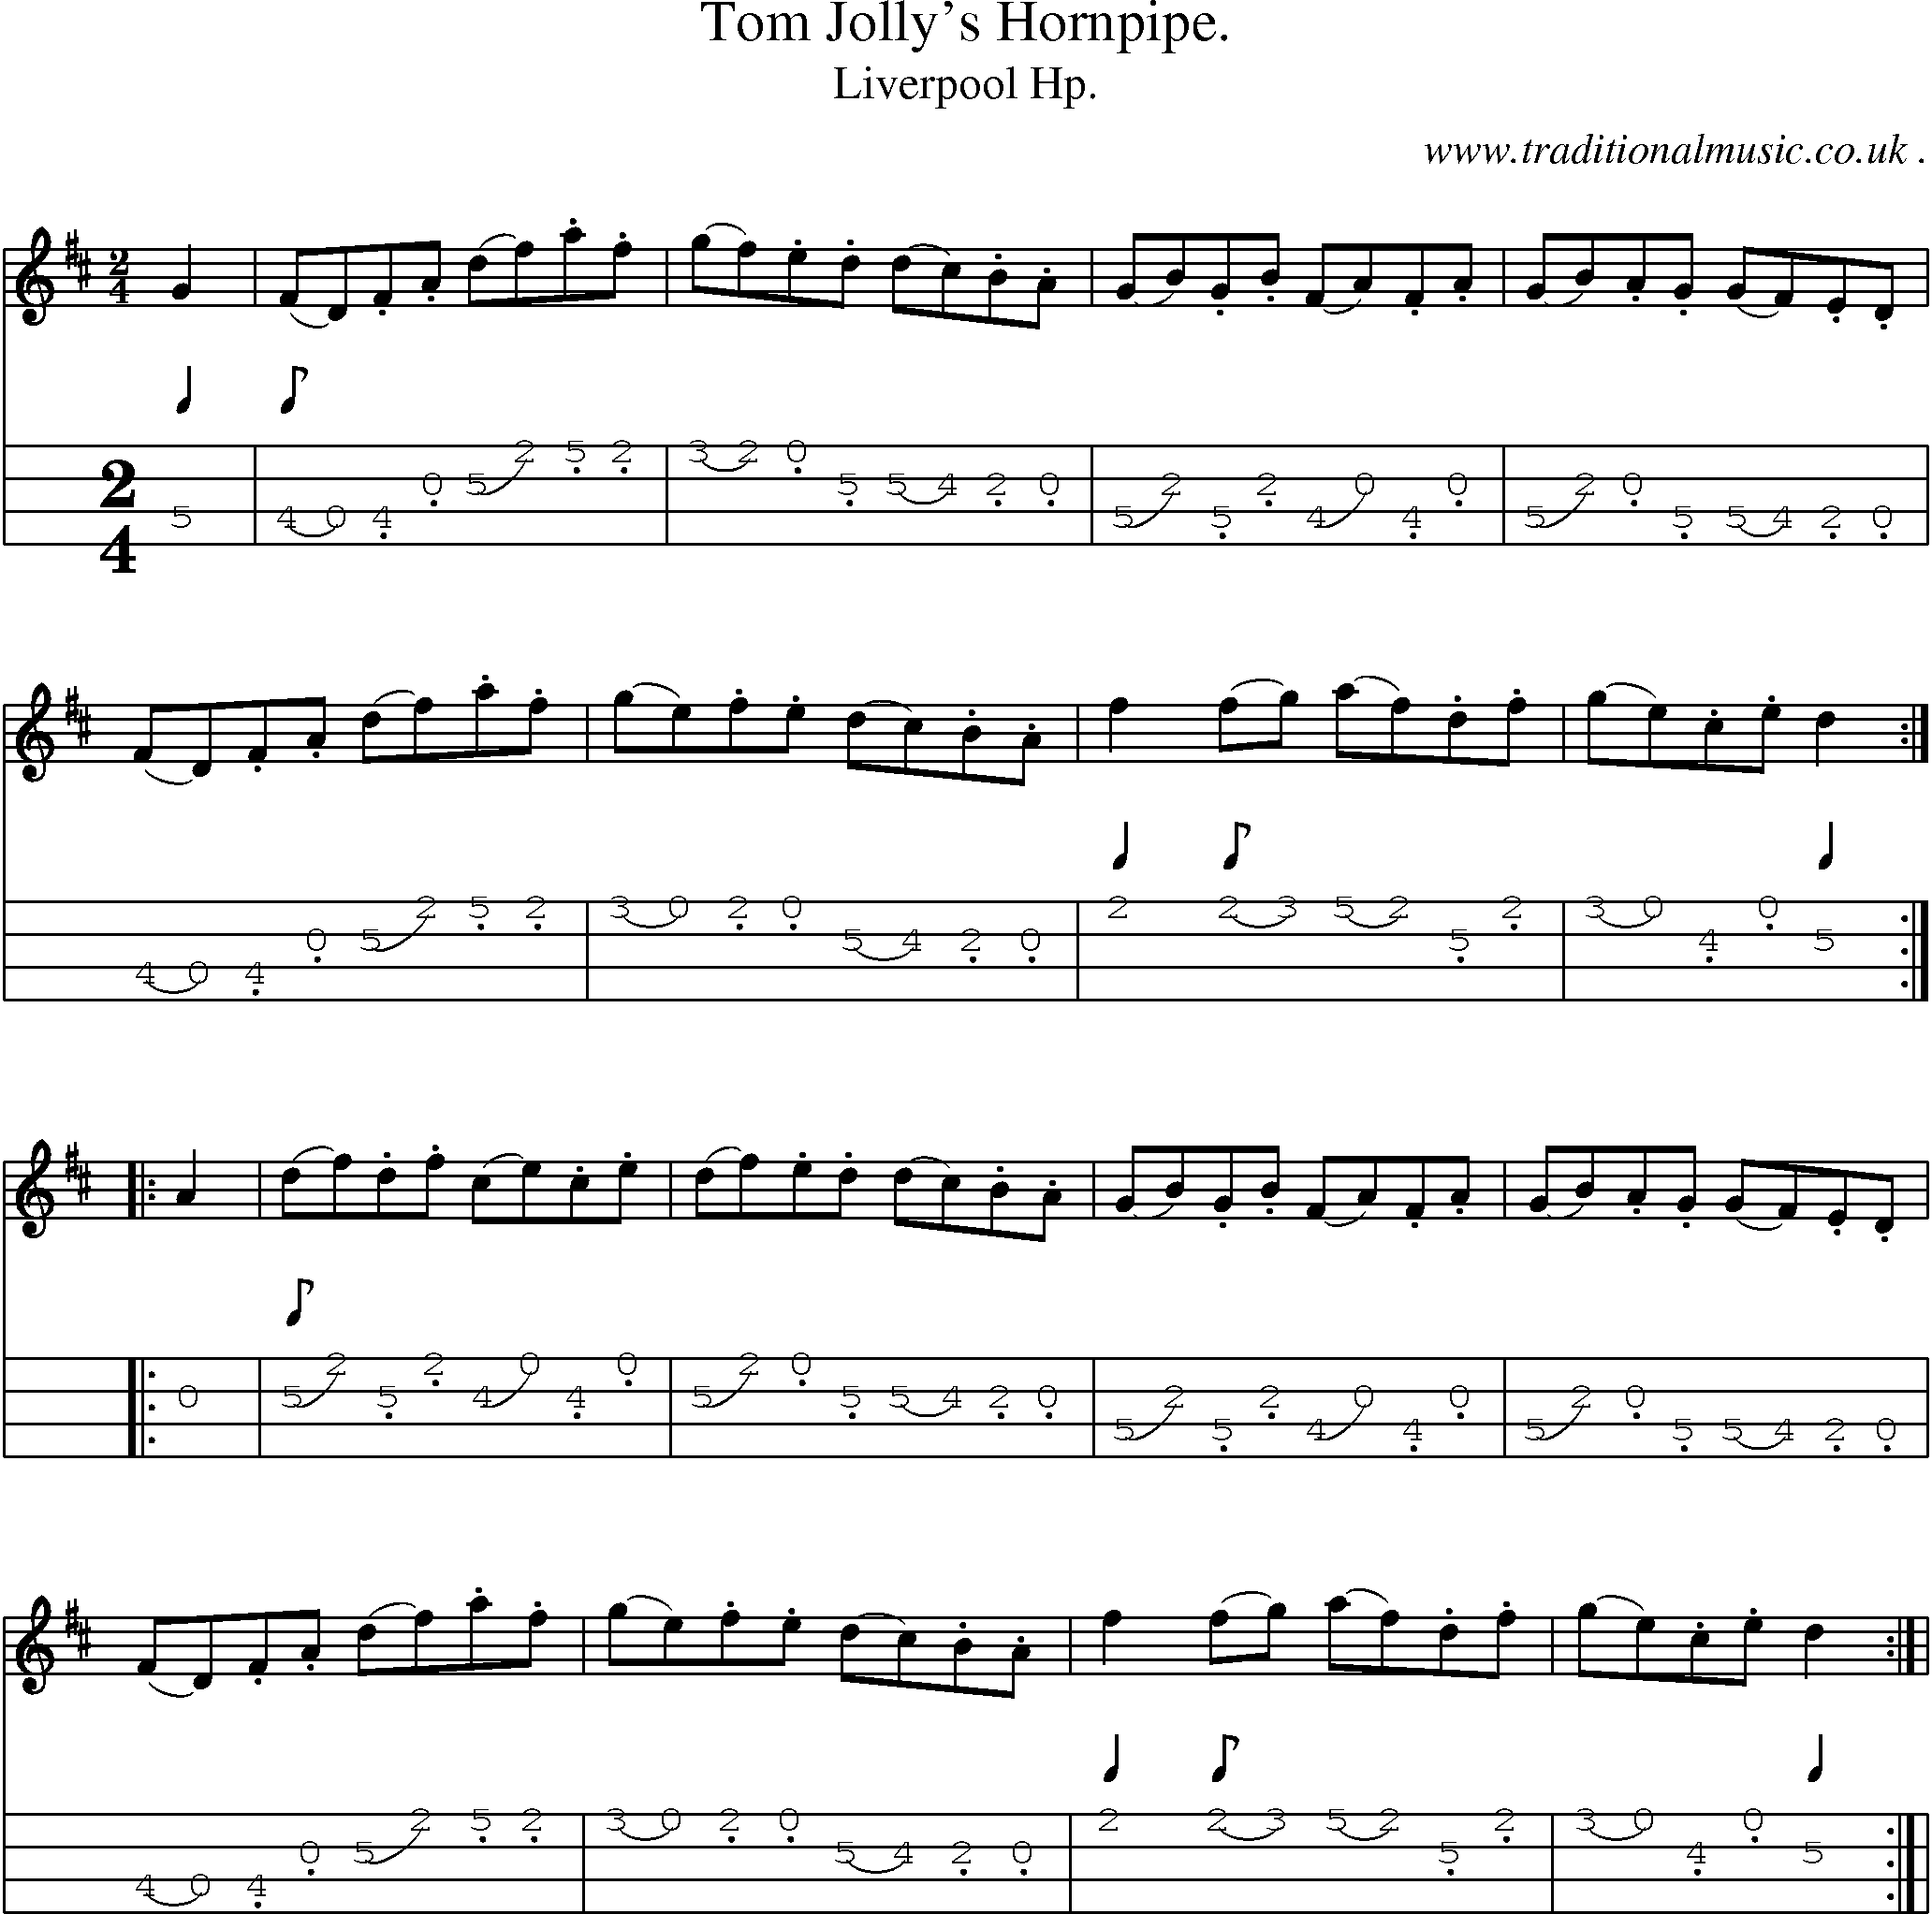 Sheet-Music and Mandolin Tabs for Tom Jollys Hornpipe